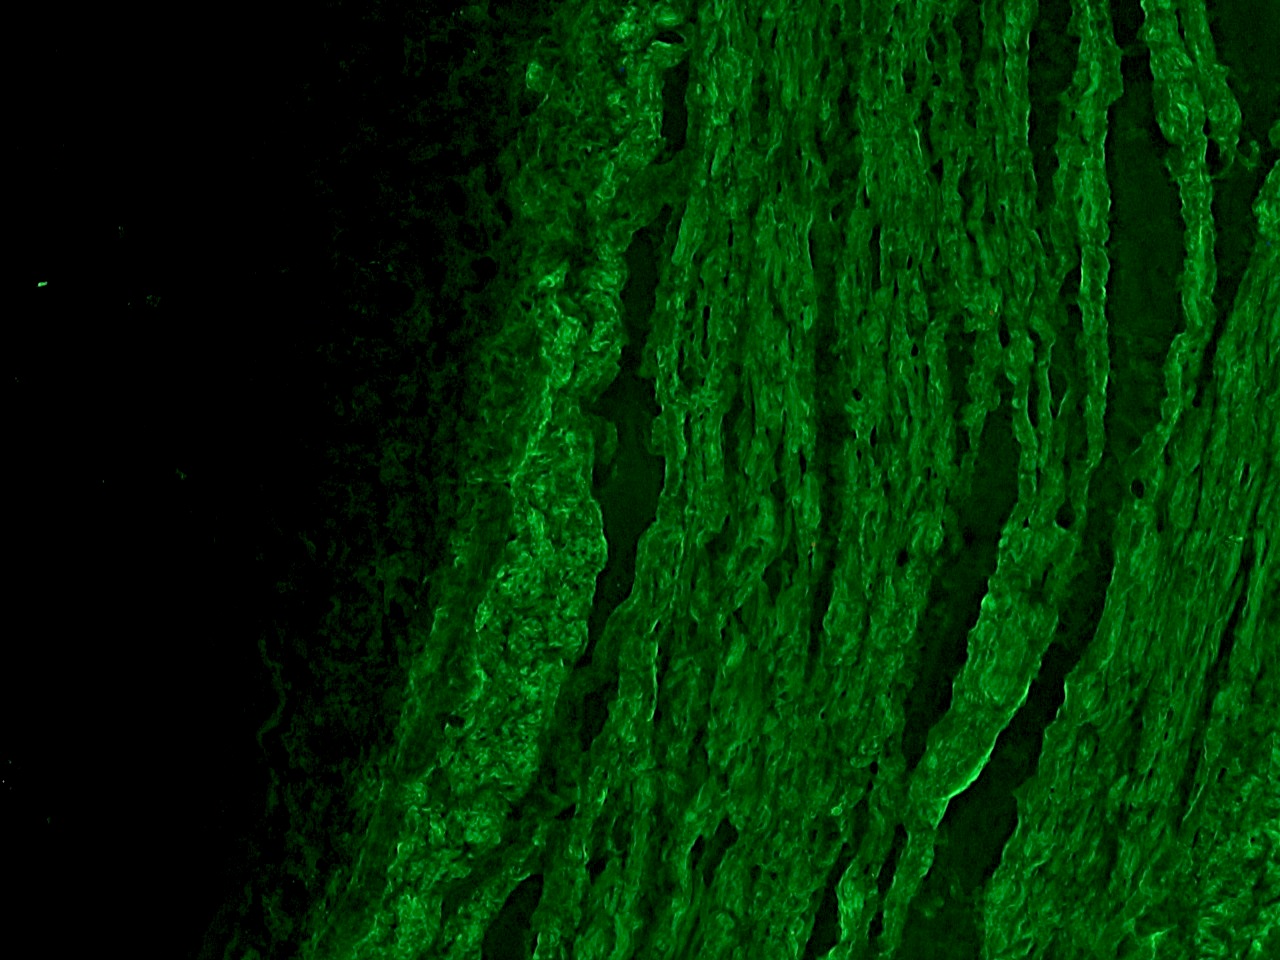 Figure 1. Indirect immunofluorescence staining of frozen section of chicken gizzard with MUB0107P (HHF35) showing specific positive staining of smooth muscle cells.